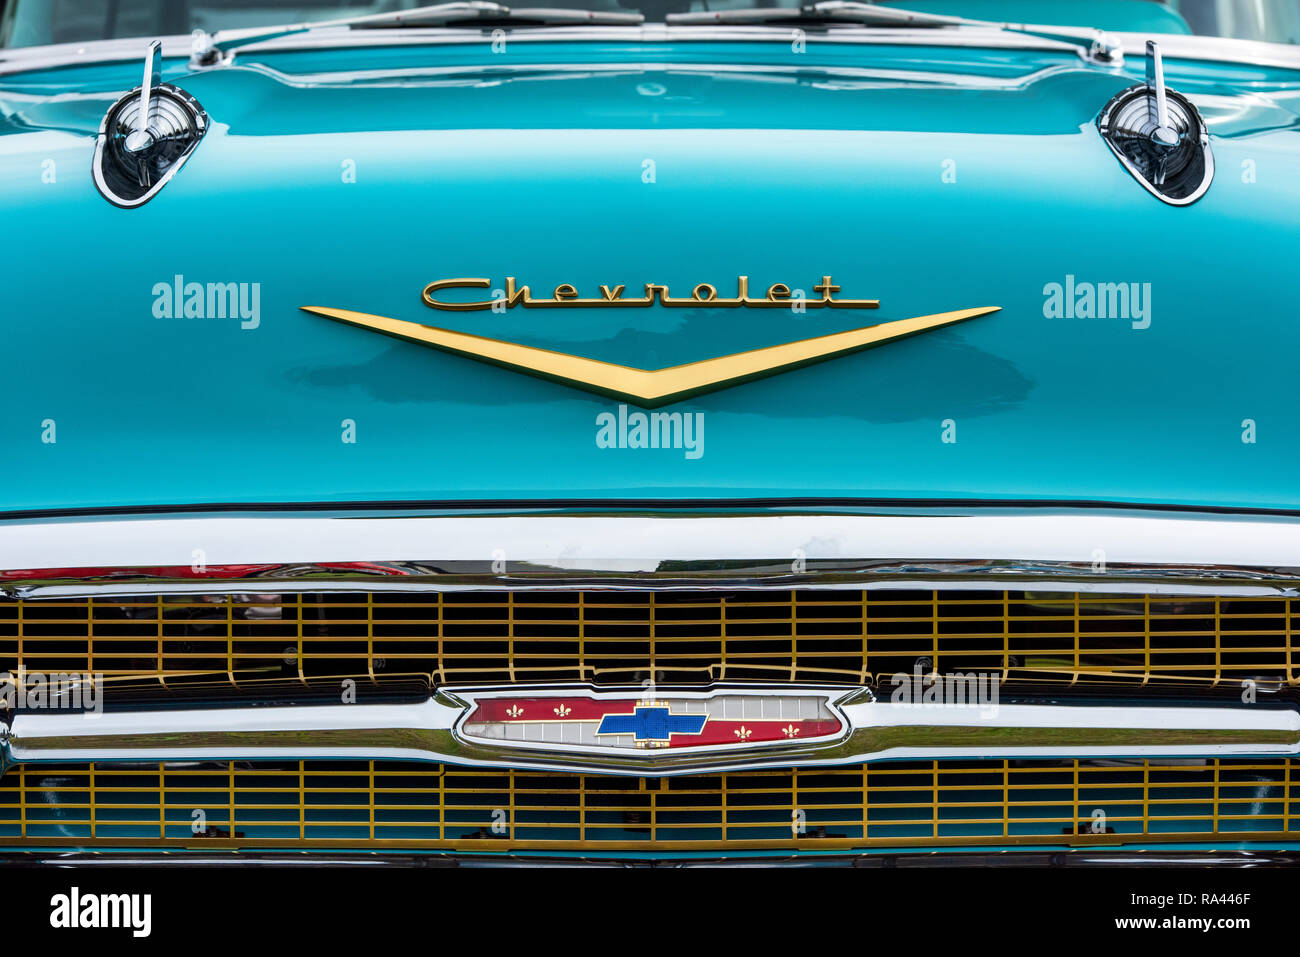 1957 Chevrolet, Bel Air. Chevy. Front end abstract. Classic American car Stock Photo